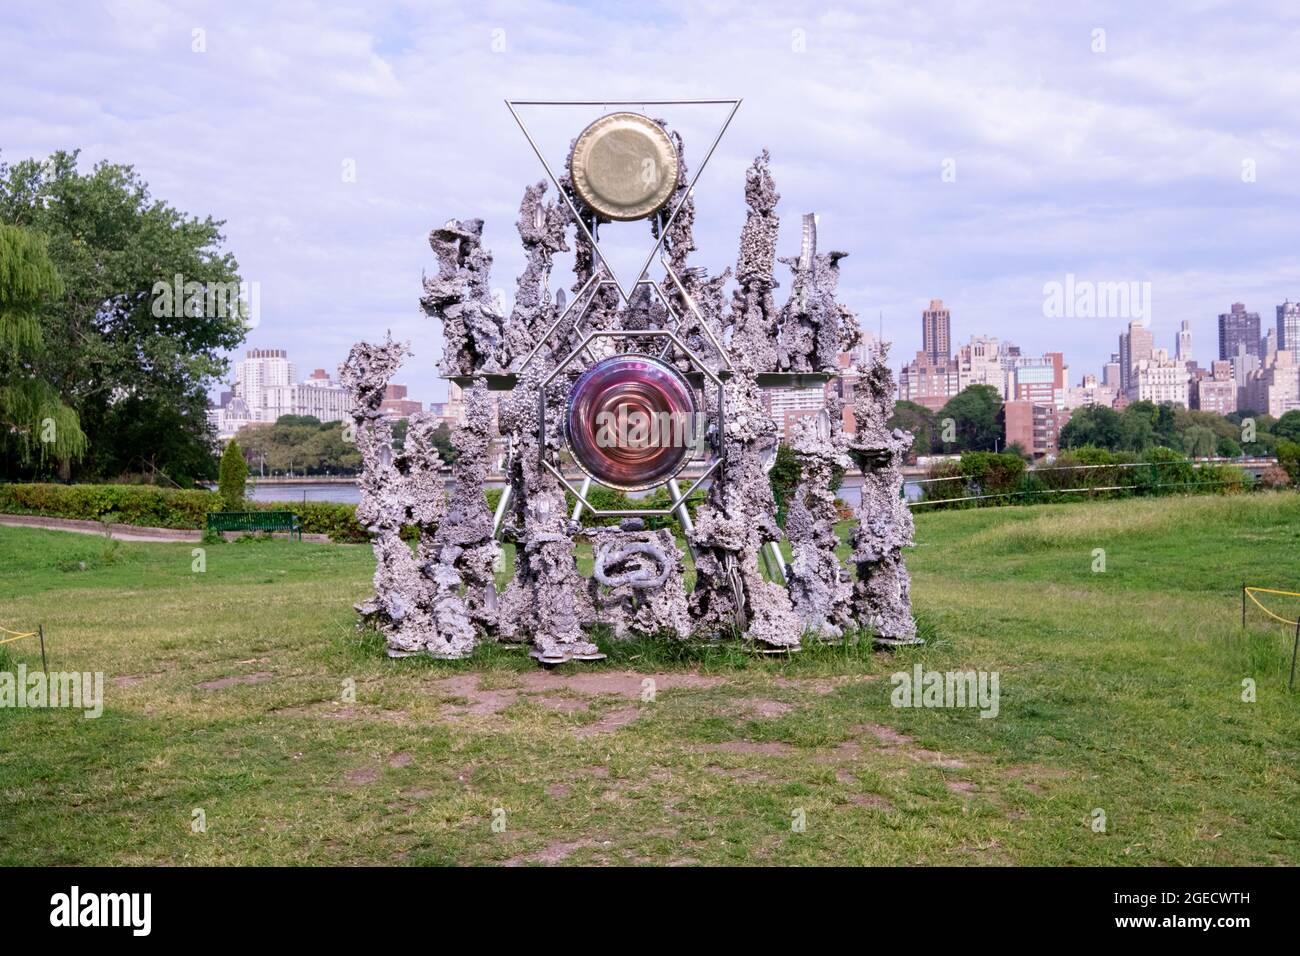 Planeta Abulex, a large sculpture on the theme of healing by Guadalupe Maravilla. At Socrates Sculpture Park in Long Island City, Queens New York. Stock Photo